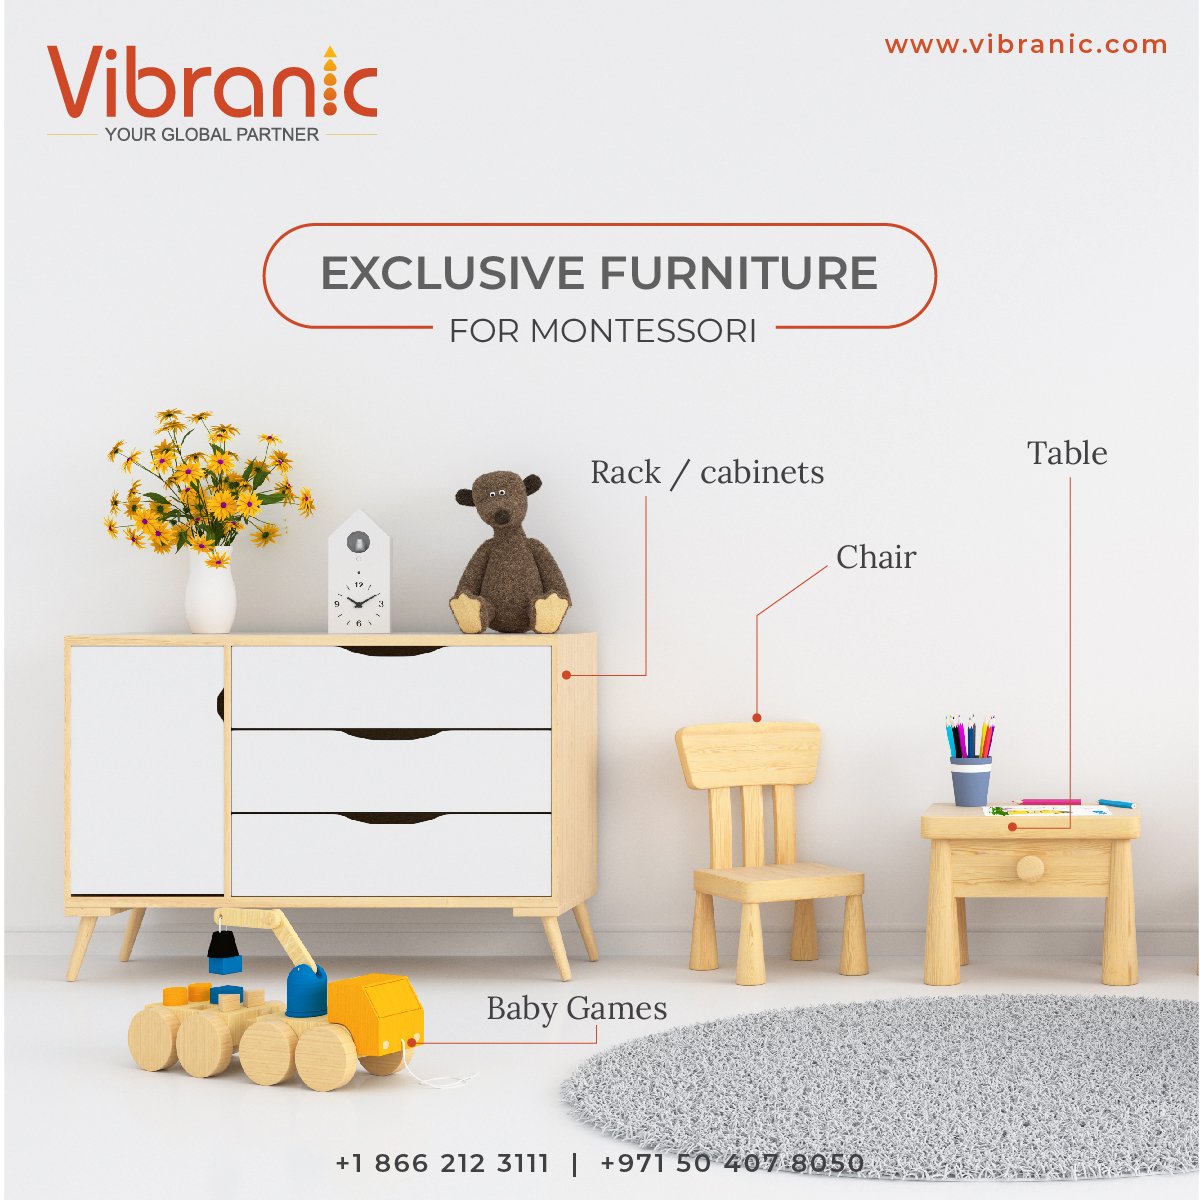 Experience the perfect blend of functionality, aesthetics in our carefully crafted furniture pieces designed to unlock the potential of Montessori education.

For more details, please reach us at mail@vibranic.com or call us at +1 866 212 3111, +971 504078050

#Vibranic